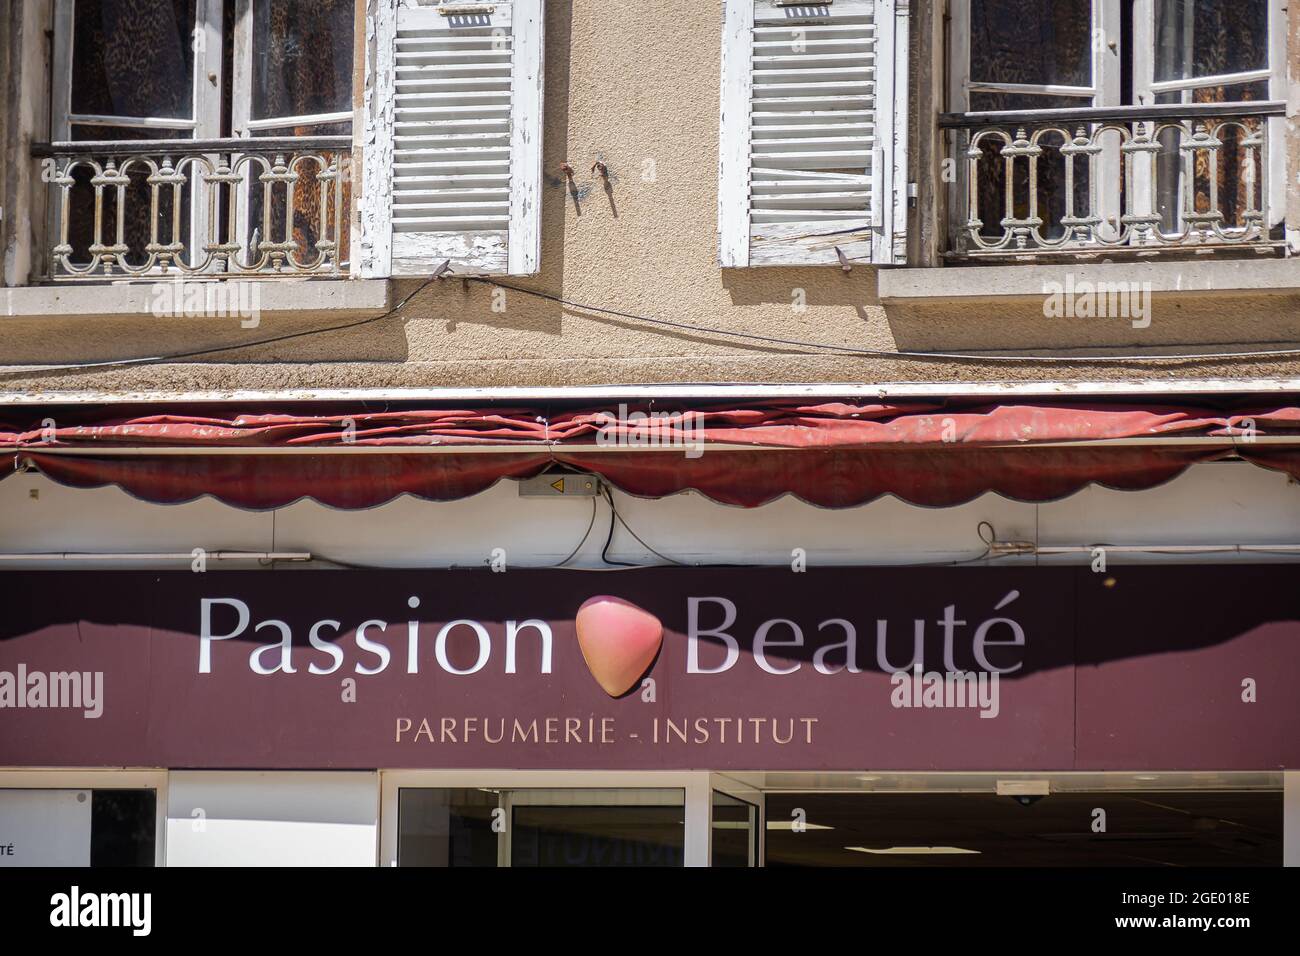 Sisteron, France - July 7, 2020: Passion Beaute Sisteron perfumery and institute - Perfumes, beauty products, face / body care for Men and Women. Stock Photo